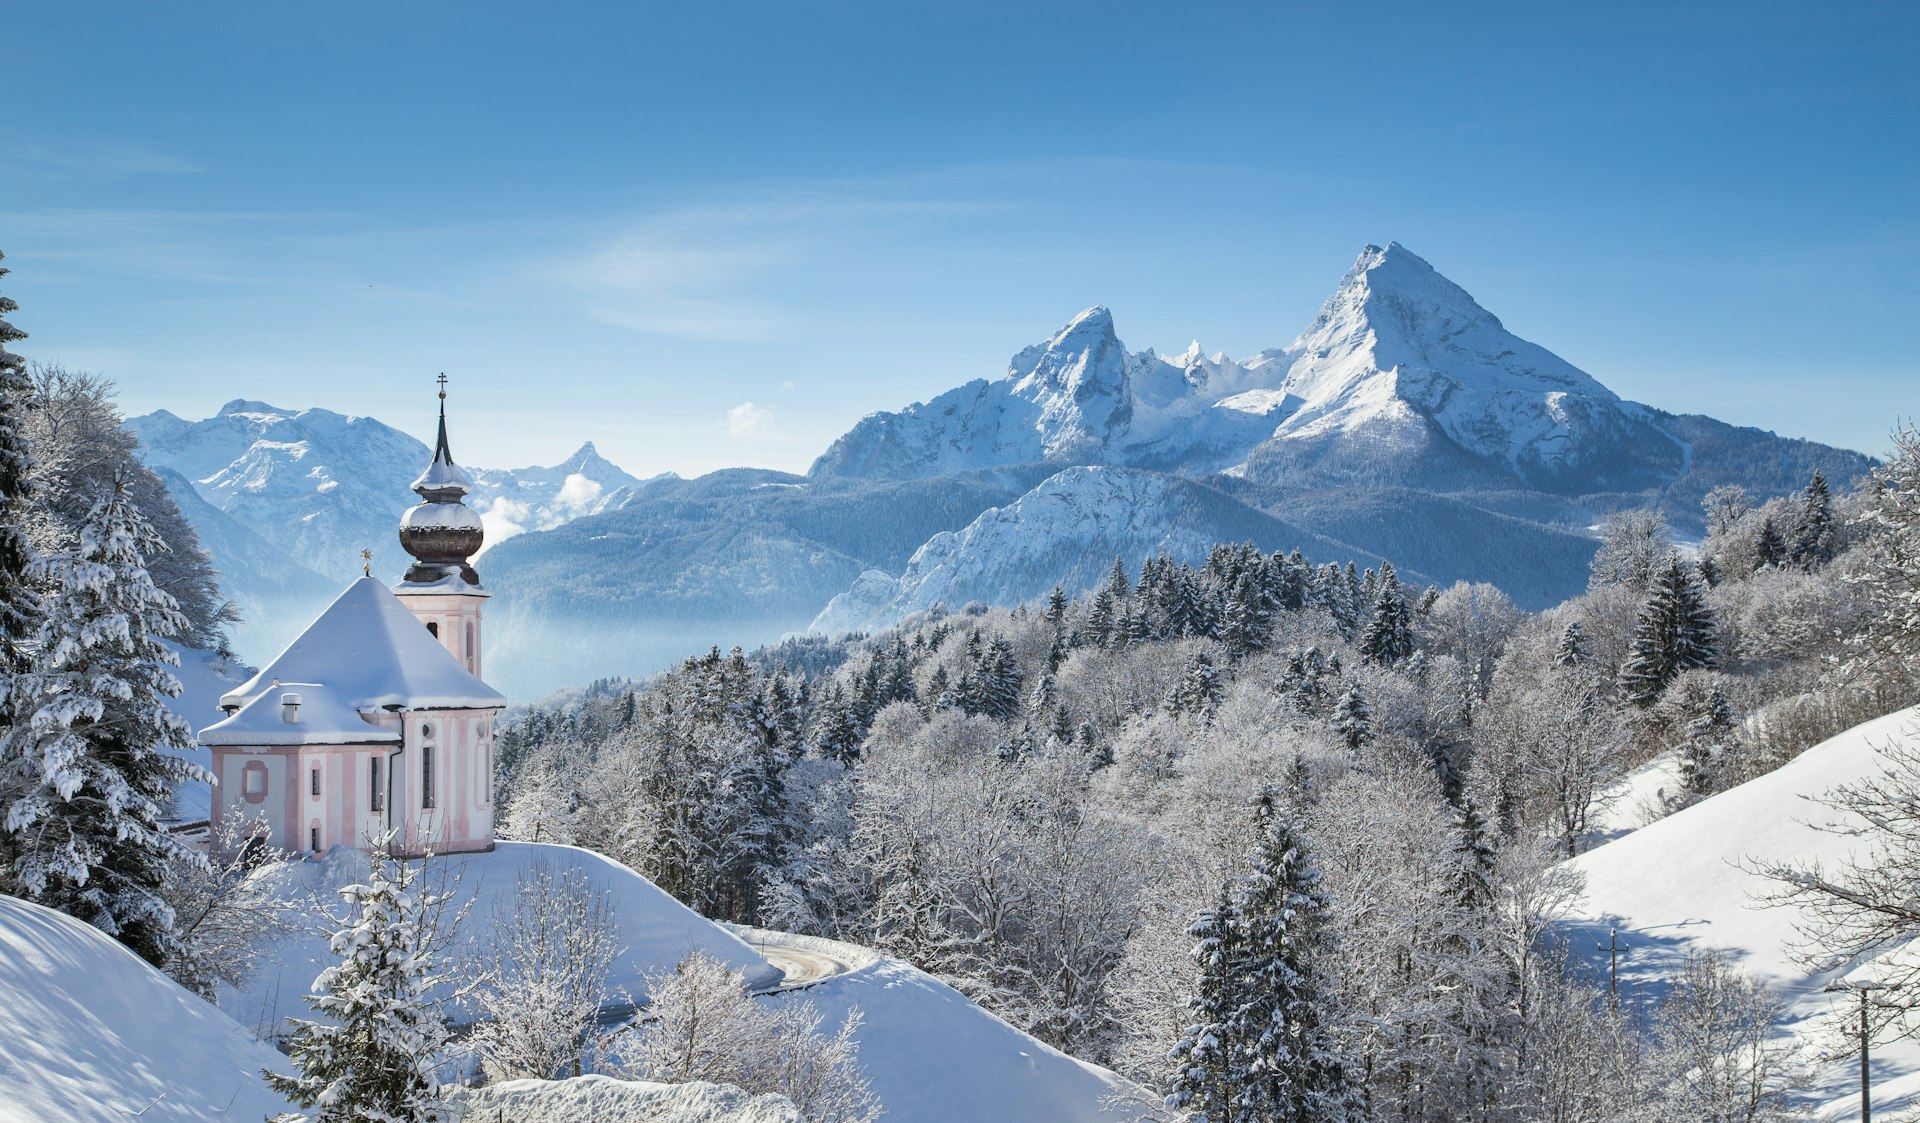 Panoramic view of beautiful winter landscape with a church in the foreground and a mountain in the background.